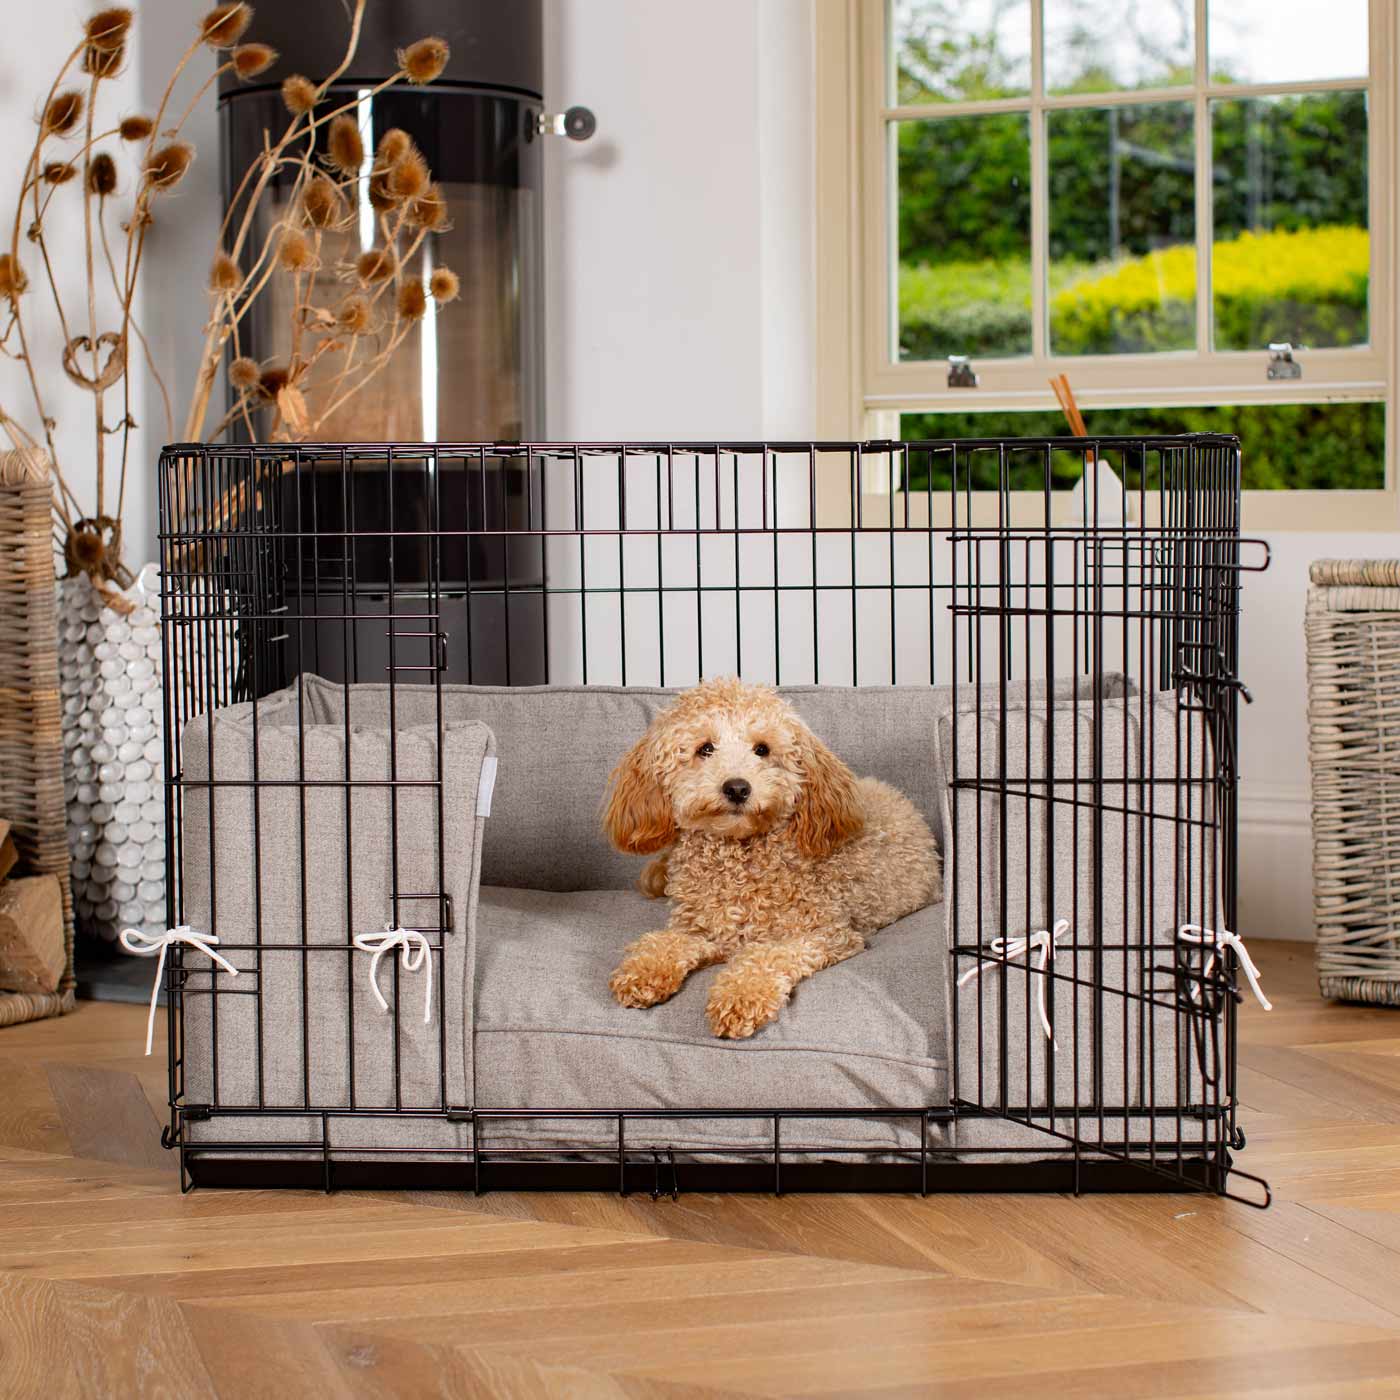 Luxury Dog Crate Bumper Cover, in Inchmurrin Ground, The Perfect Dog Bumper Spare Cover, Available Now at Lords & Labradors